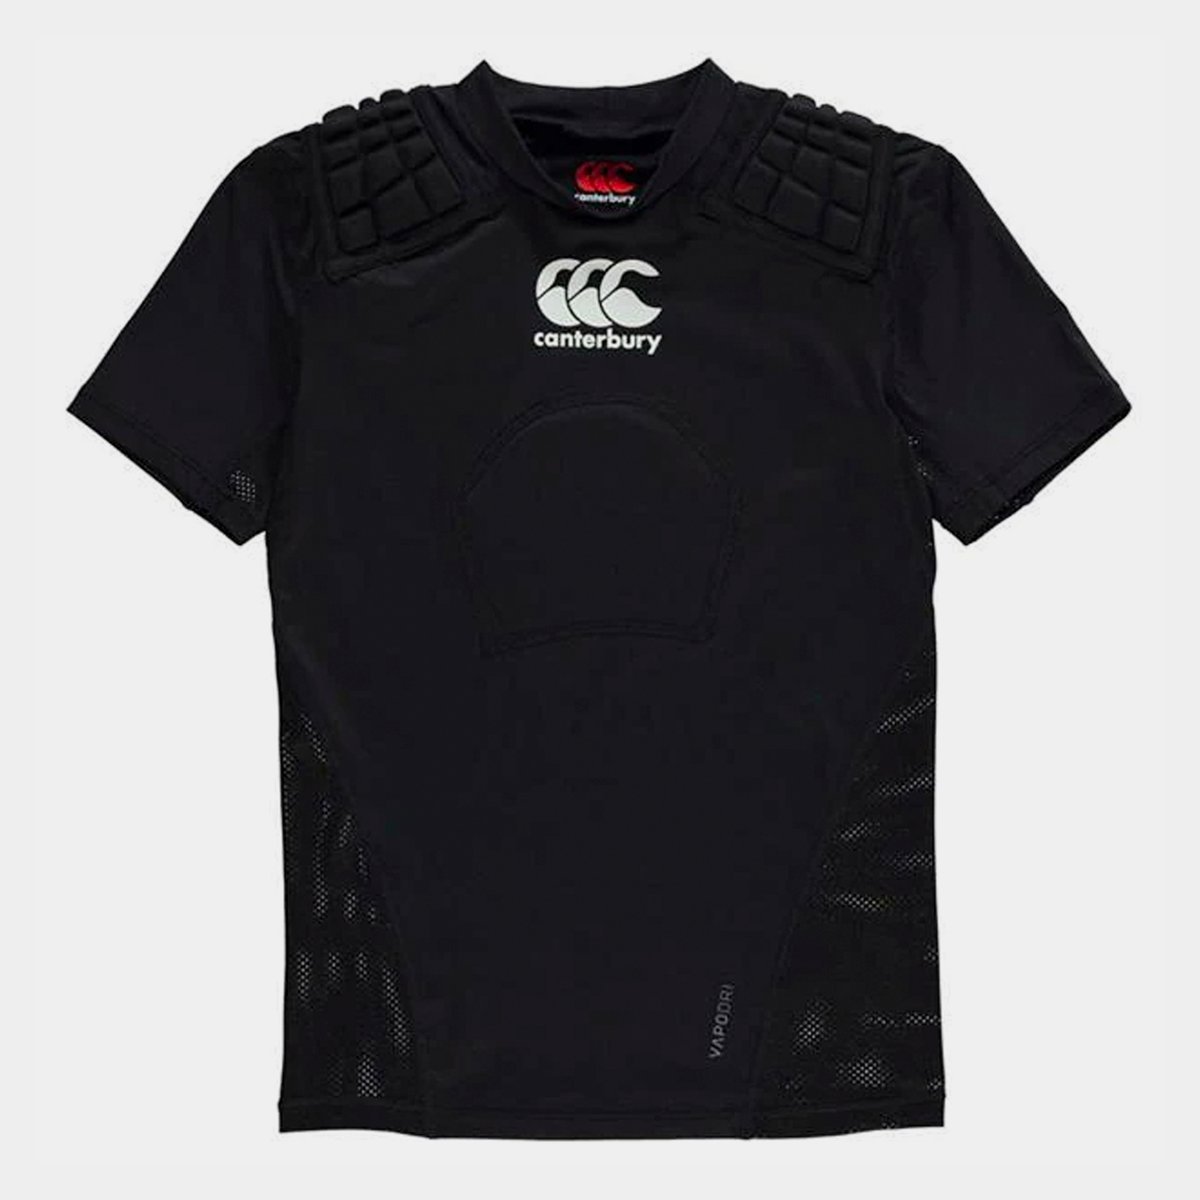 Canterbury Clothing & Accessories - Lovell Sports